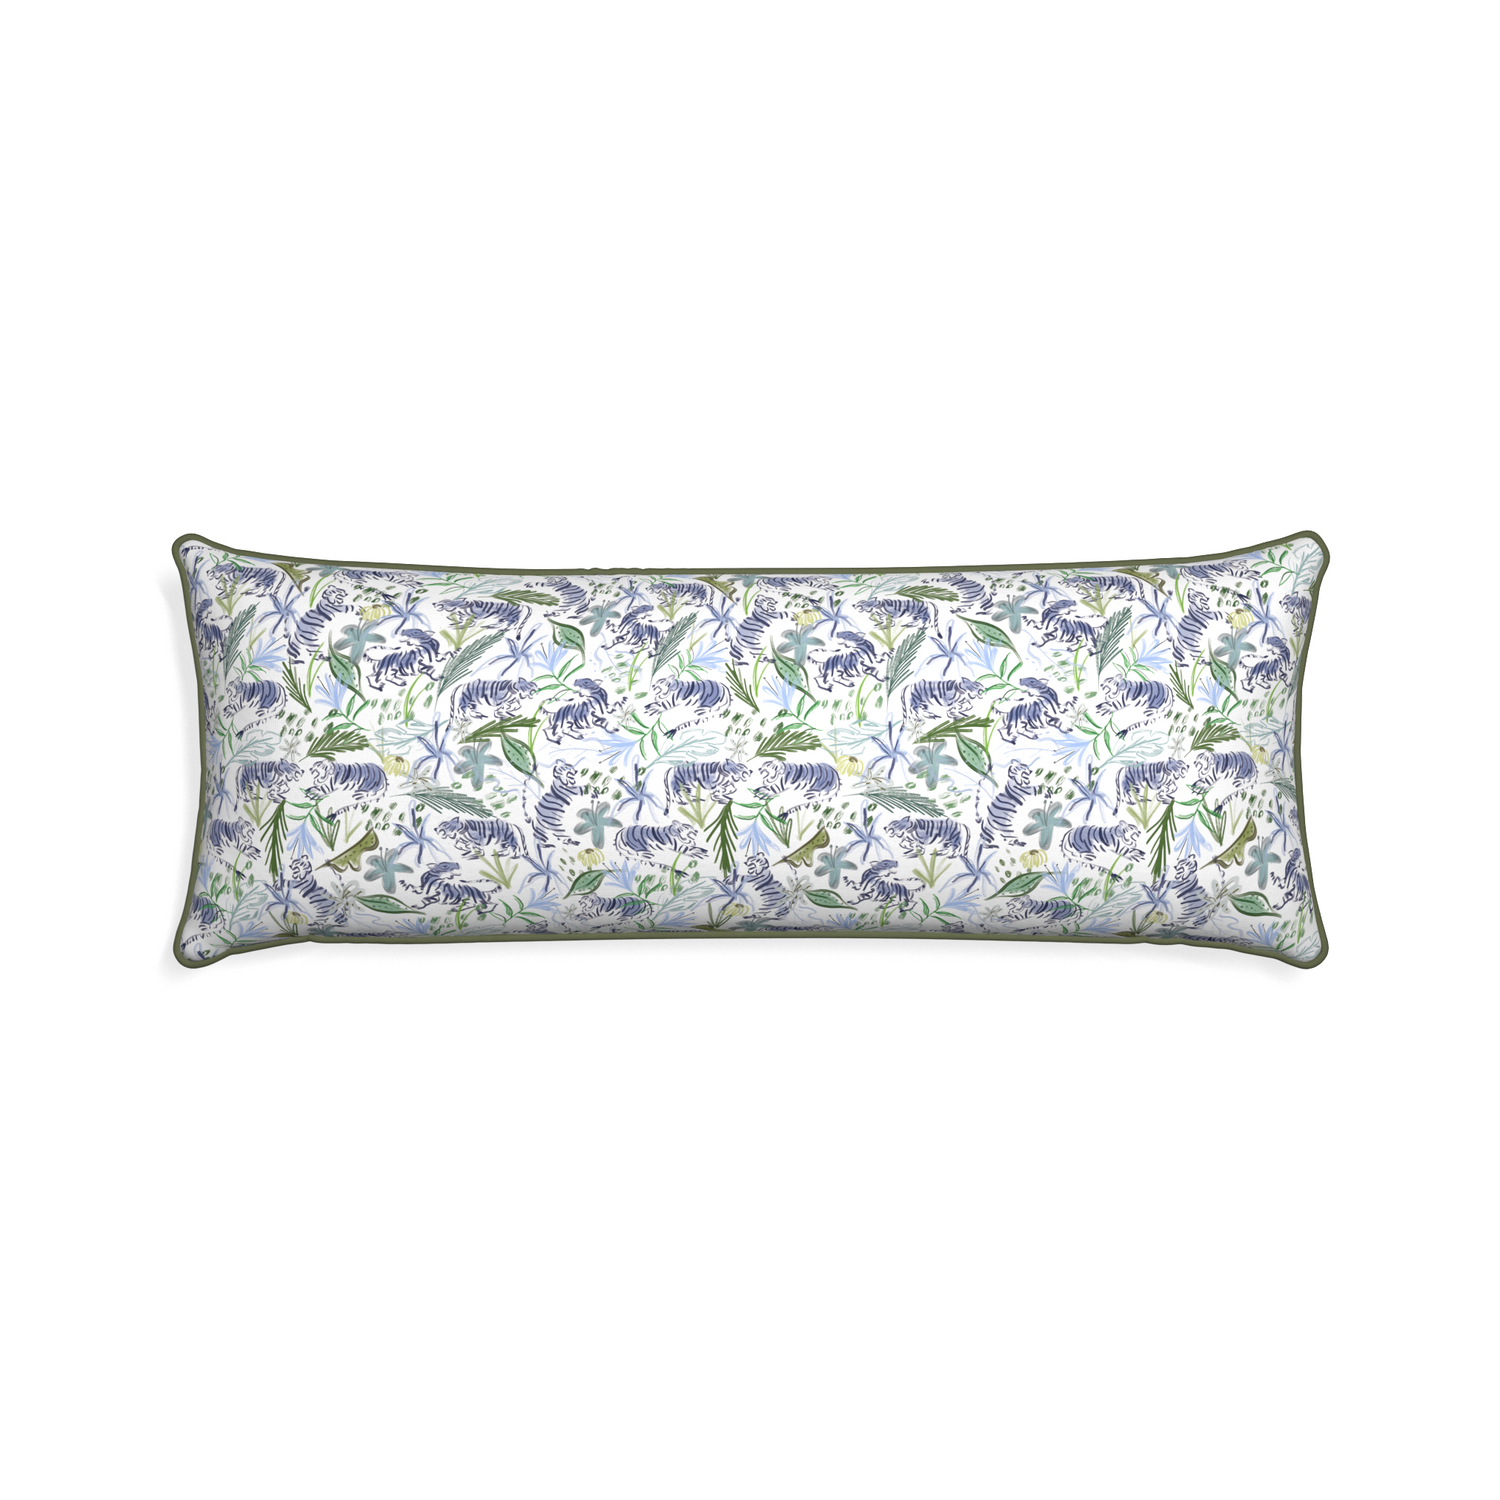 Xl-lumbar frida green custom green tigerpillow with f piping on white background